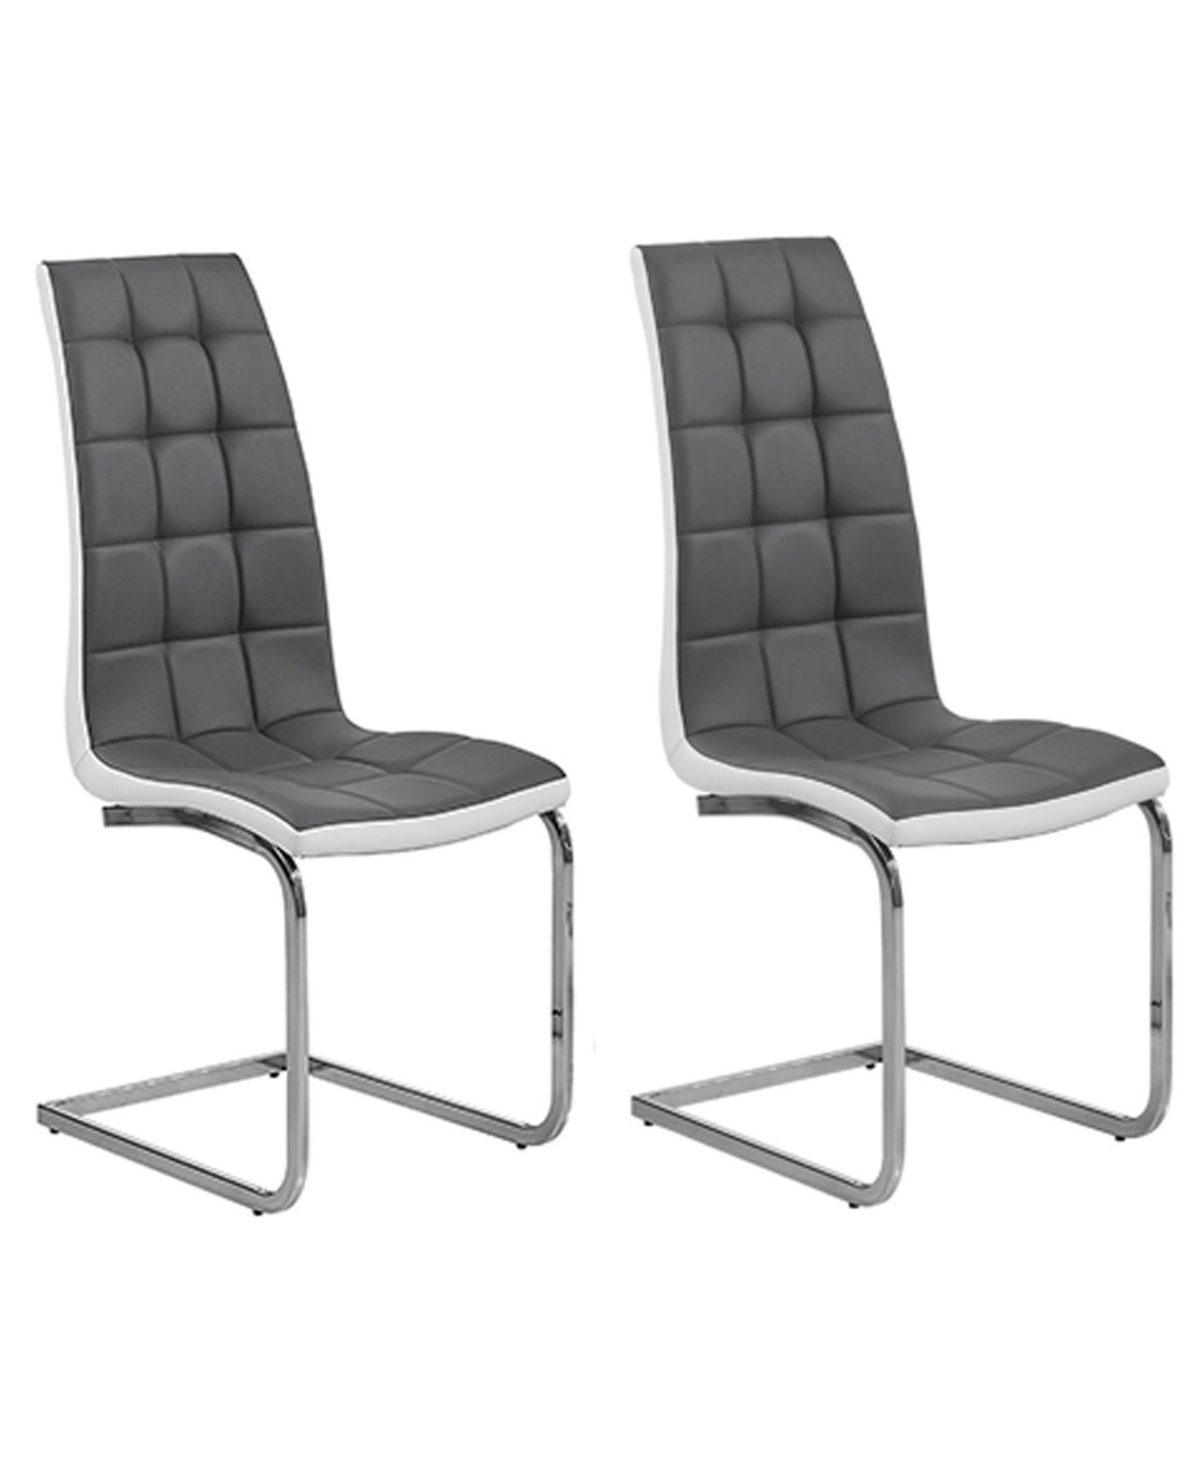 Marilyn Faux Leather Dining Side Chairs,, Set of 2